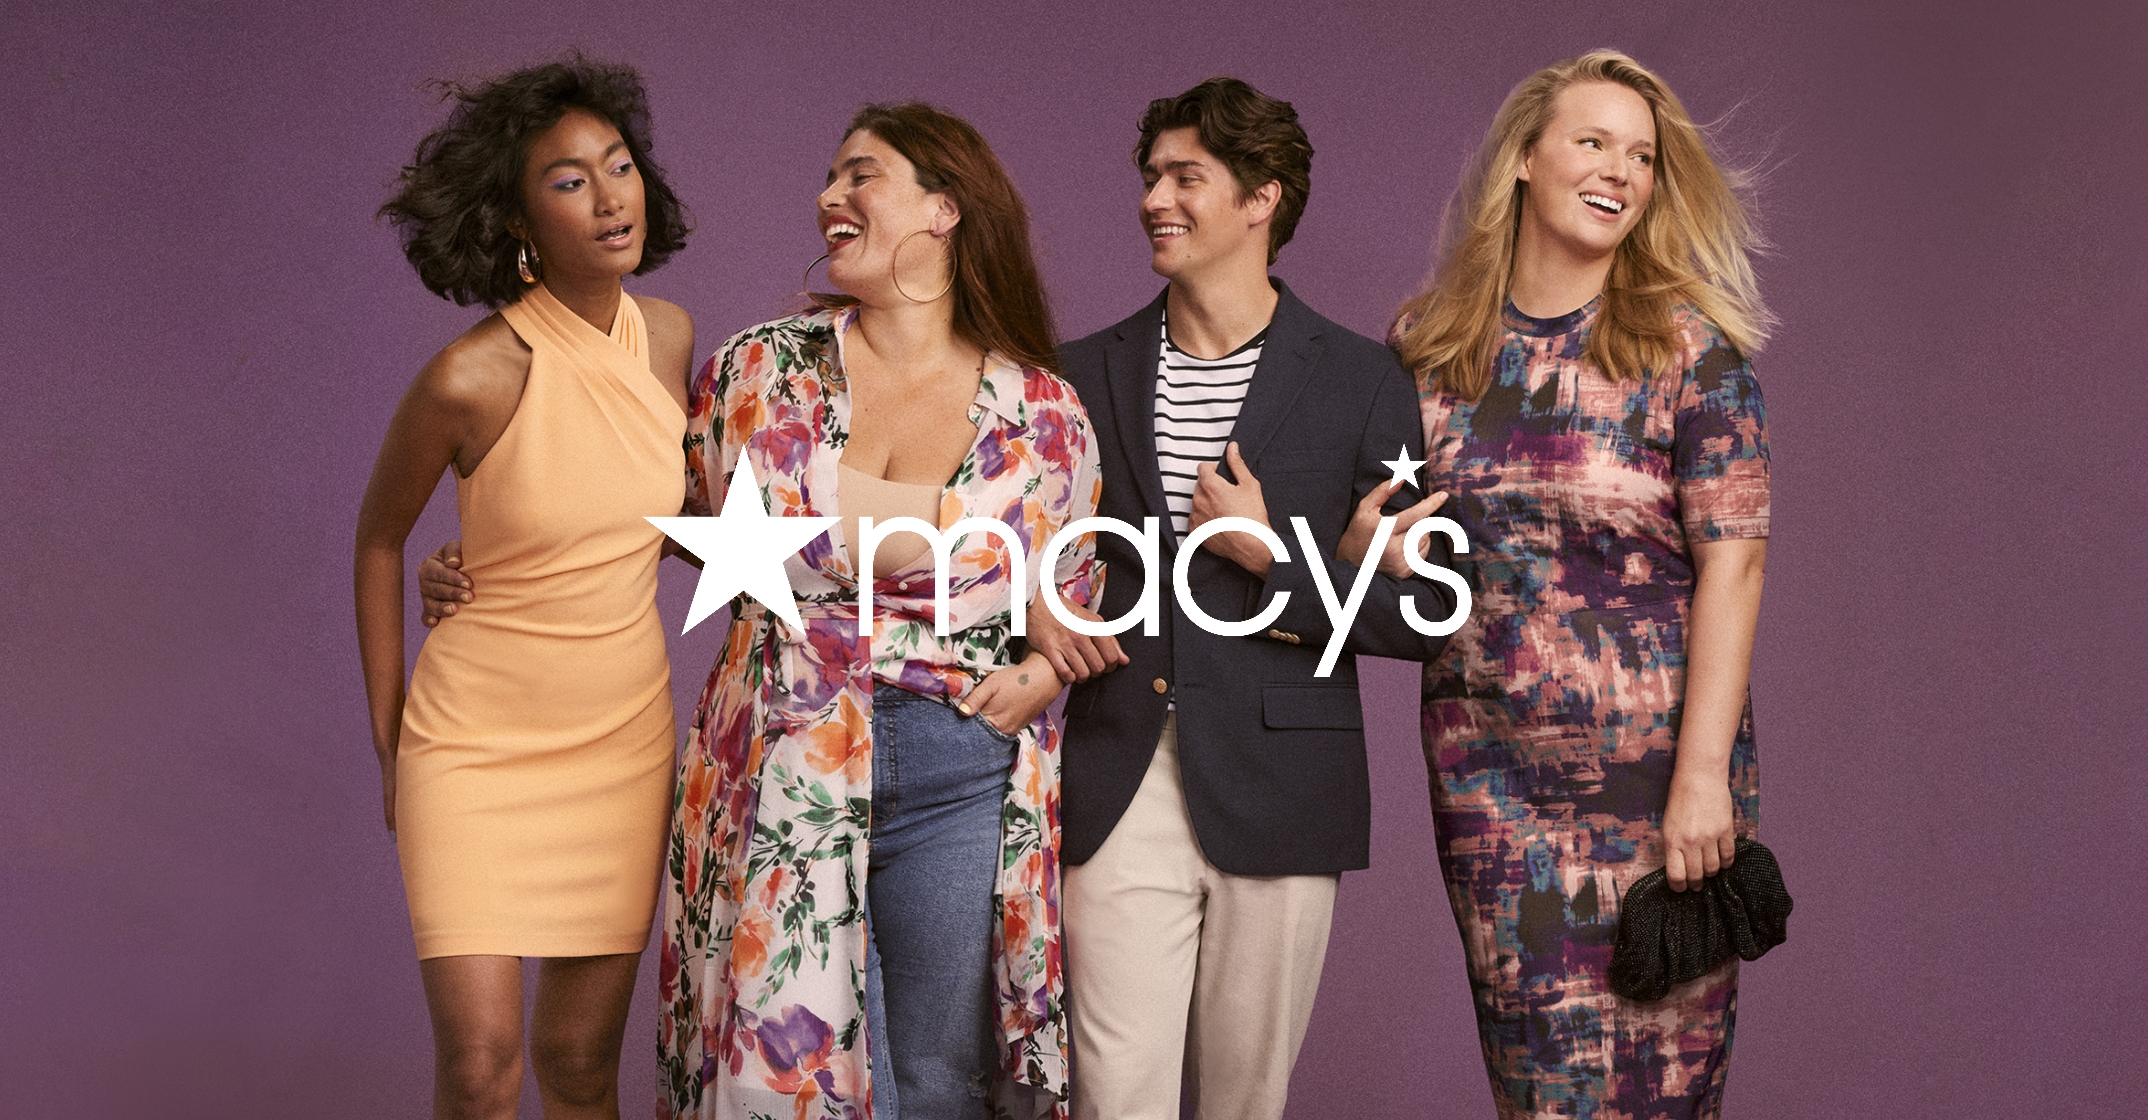 Macy's 'Own Your Style' program is turning employees into personal stylists